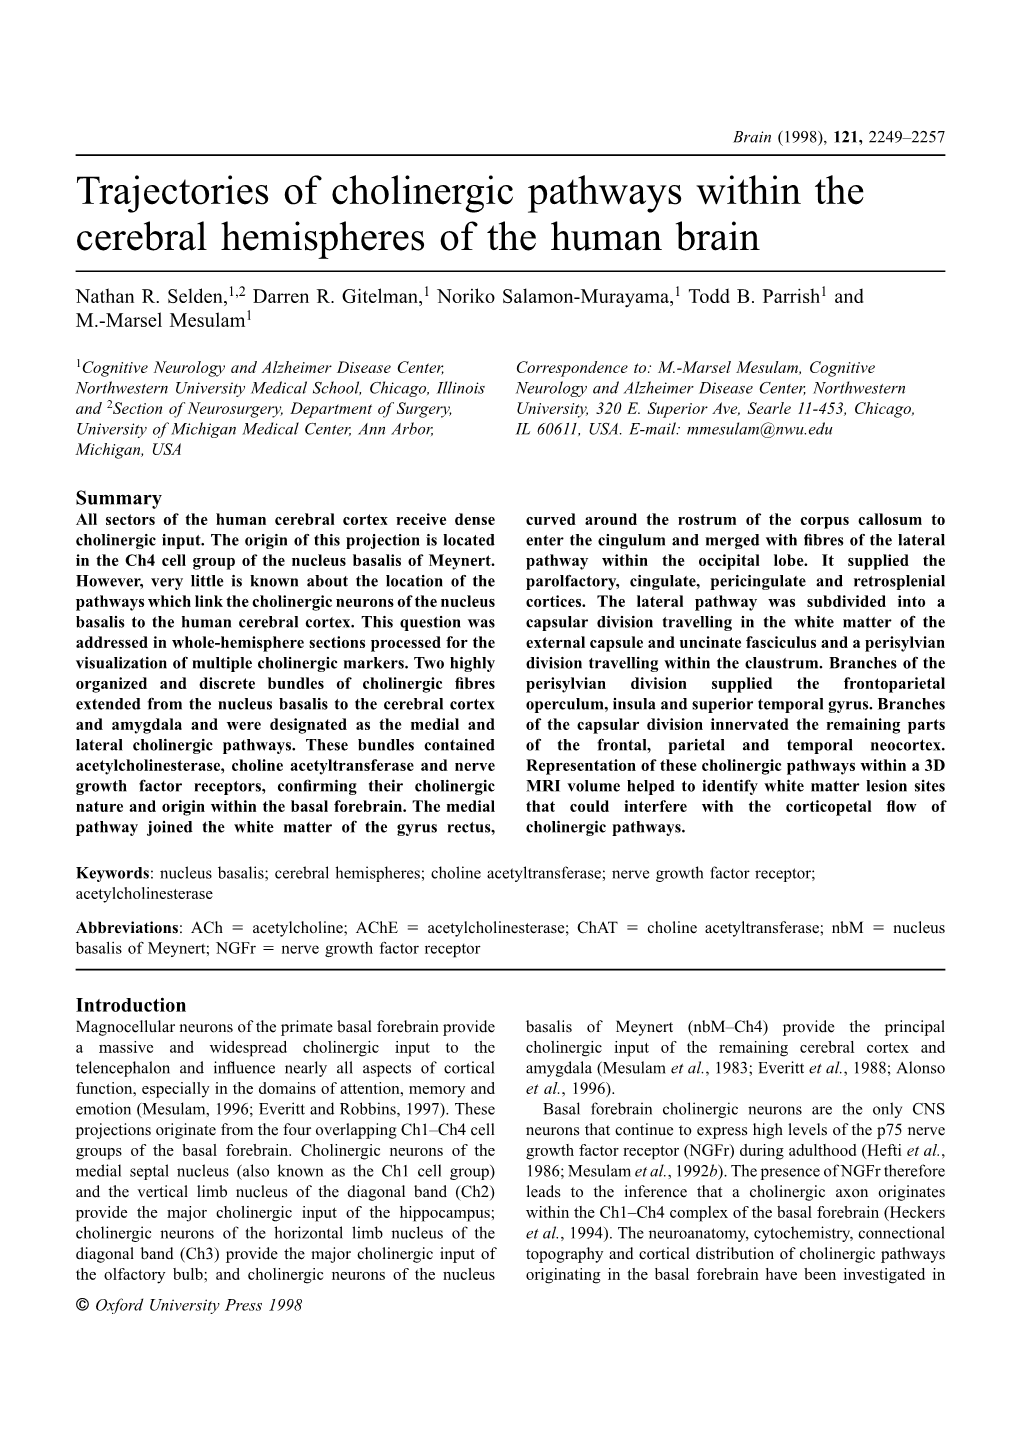 Trajectories of Cholinergic Pathways Within the Cerebral Hemispheres of the Human Brain